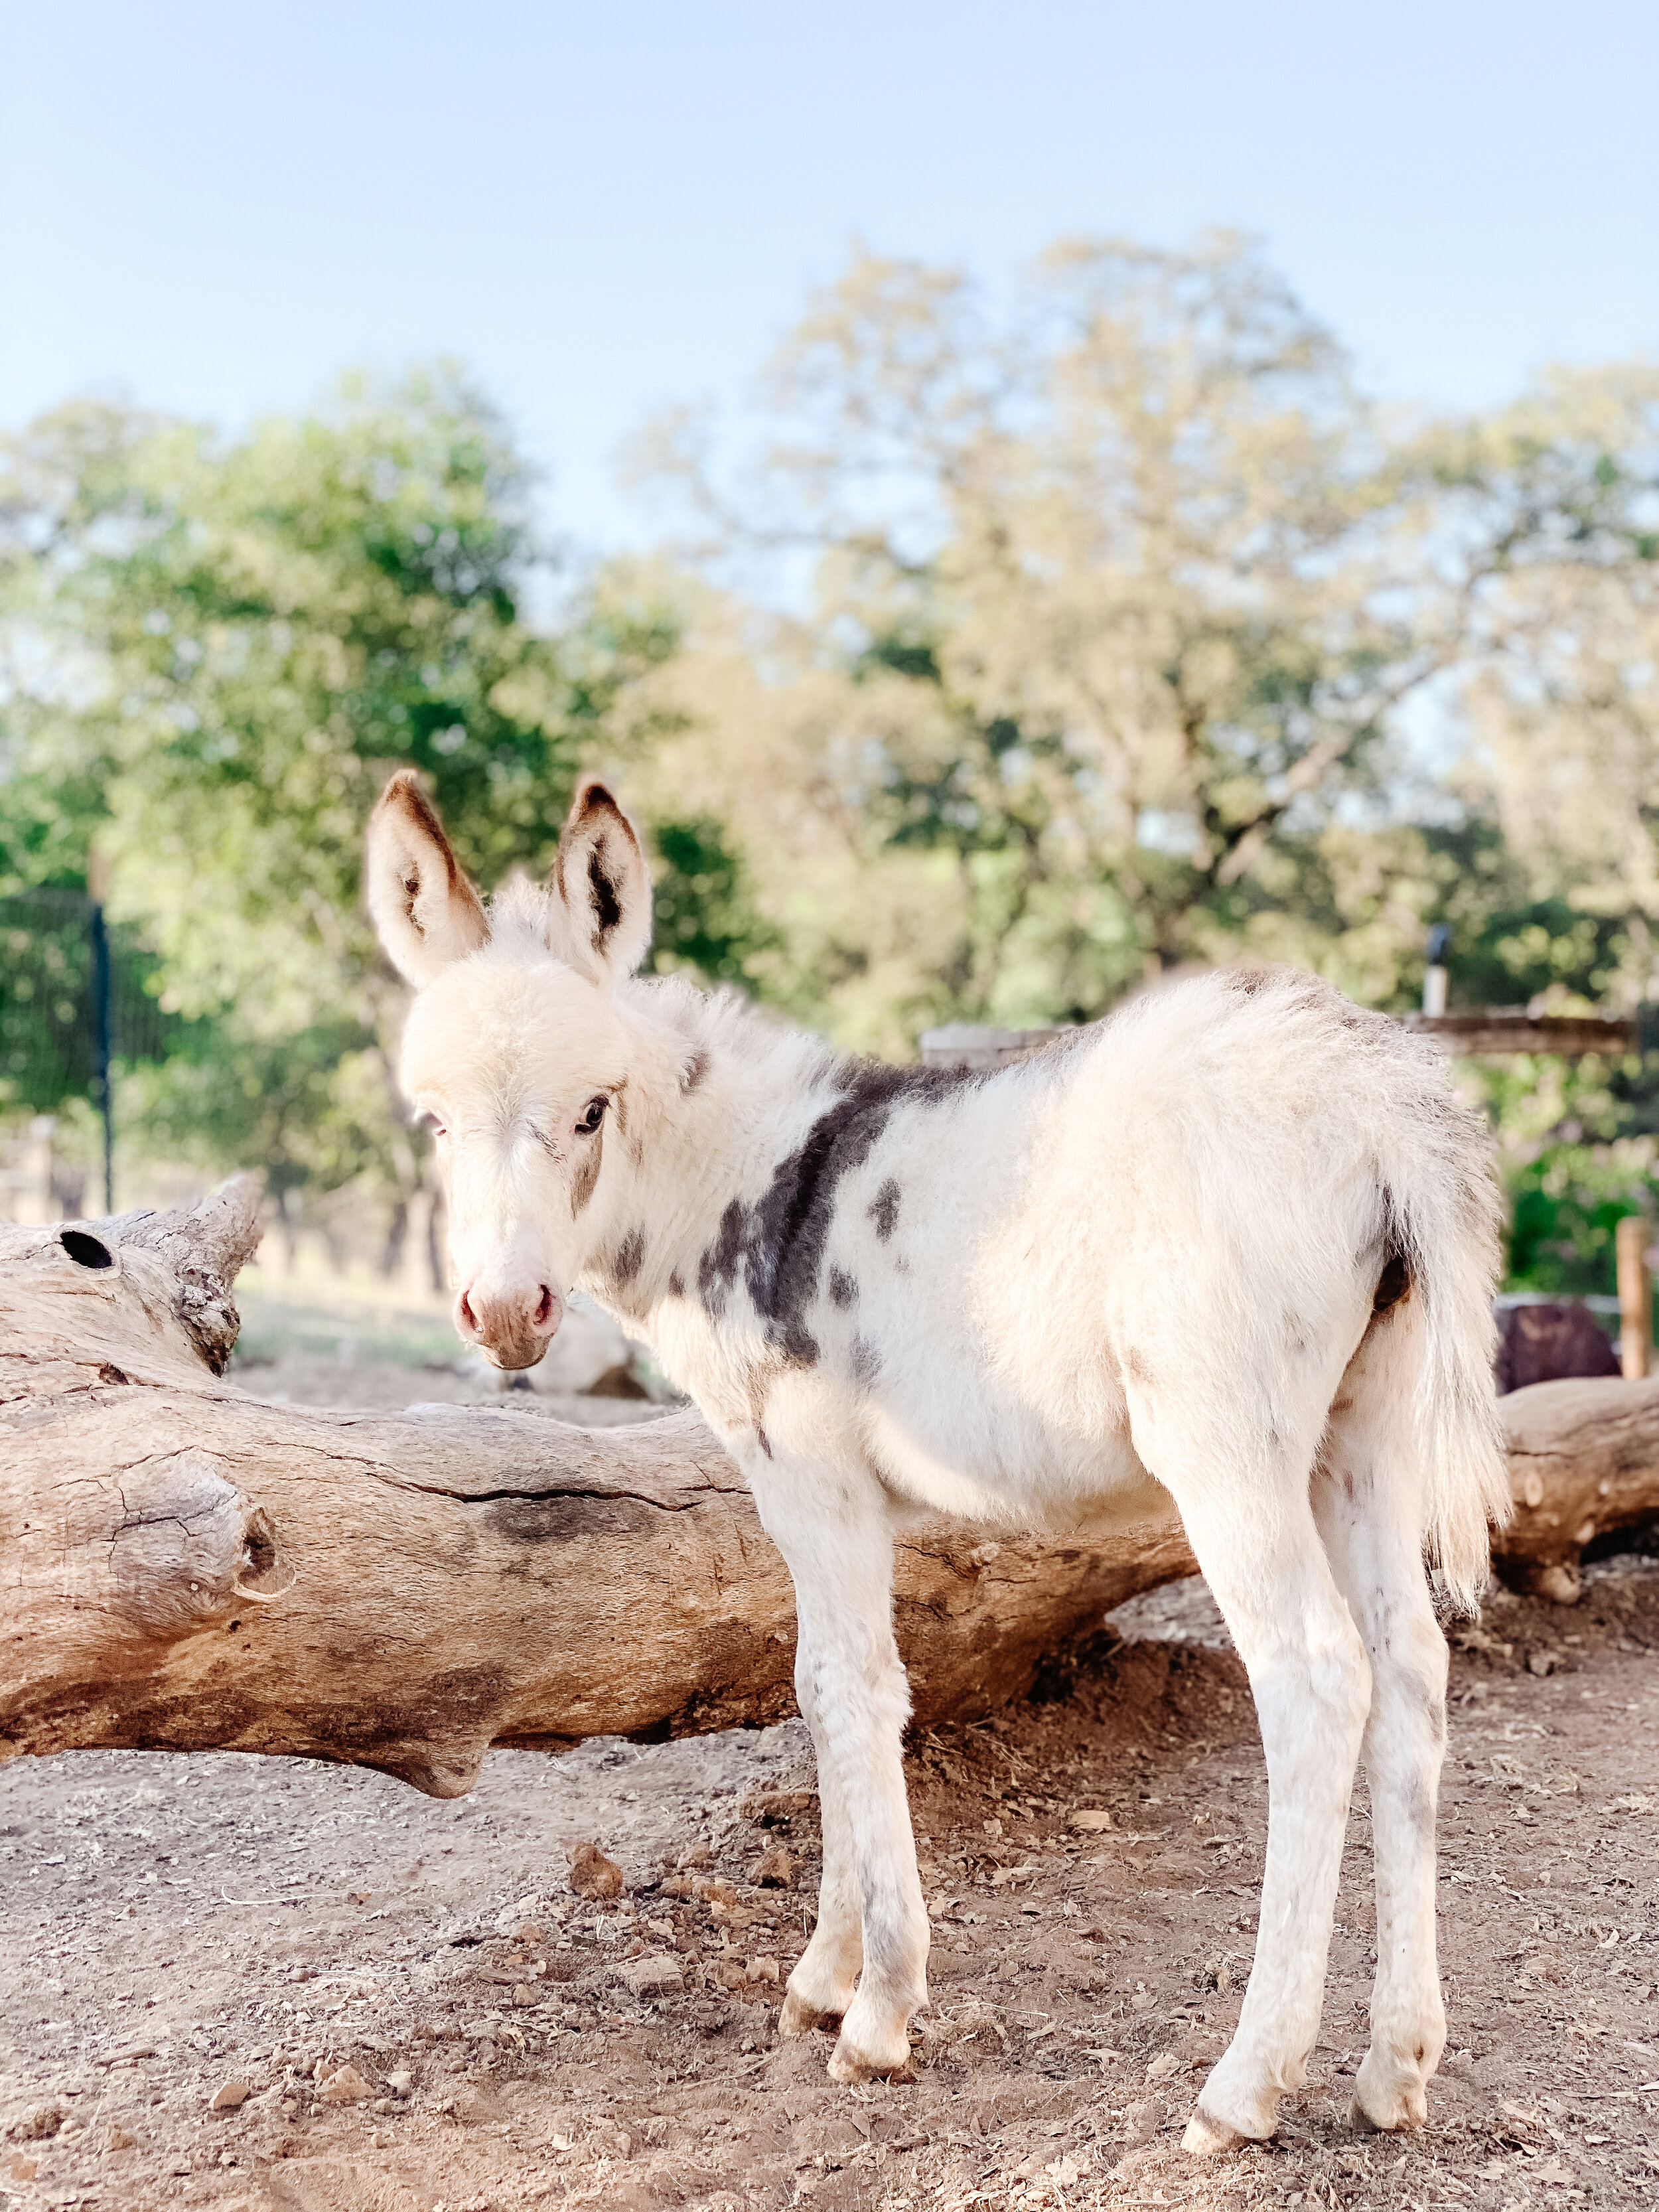 If you're thinking about getting a miniature donkey, read all about them in this post including the 5 best reasons to own a mini donkey!